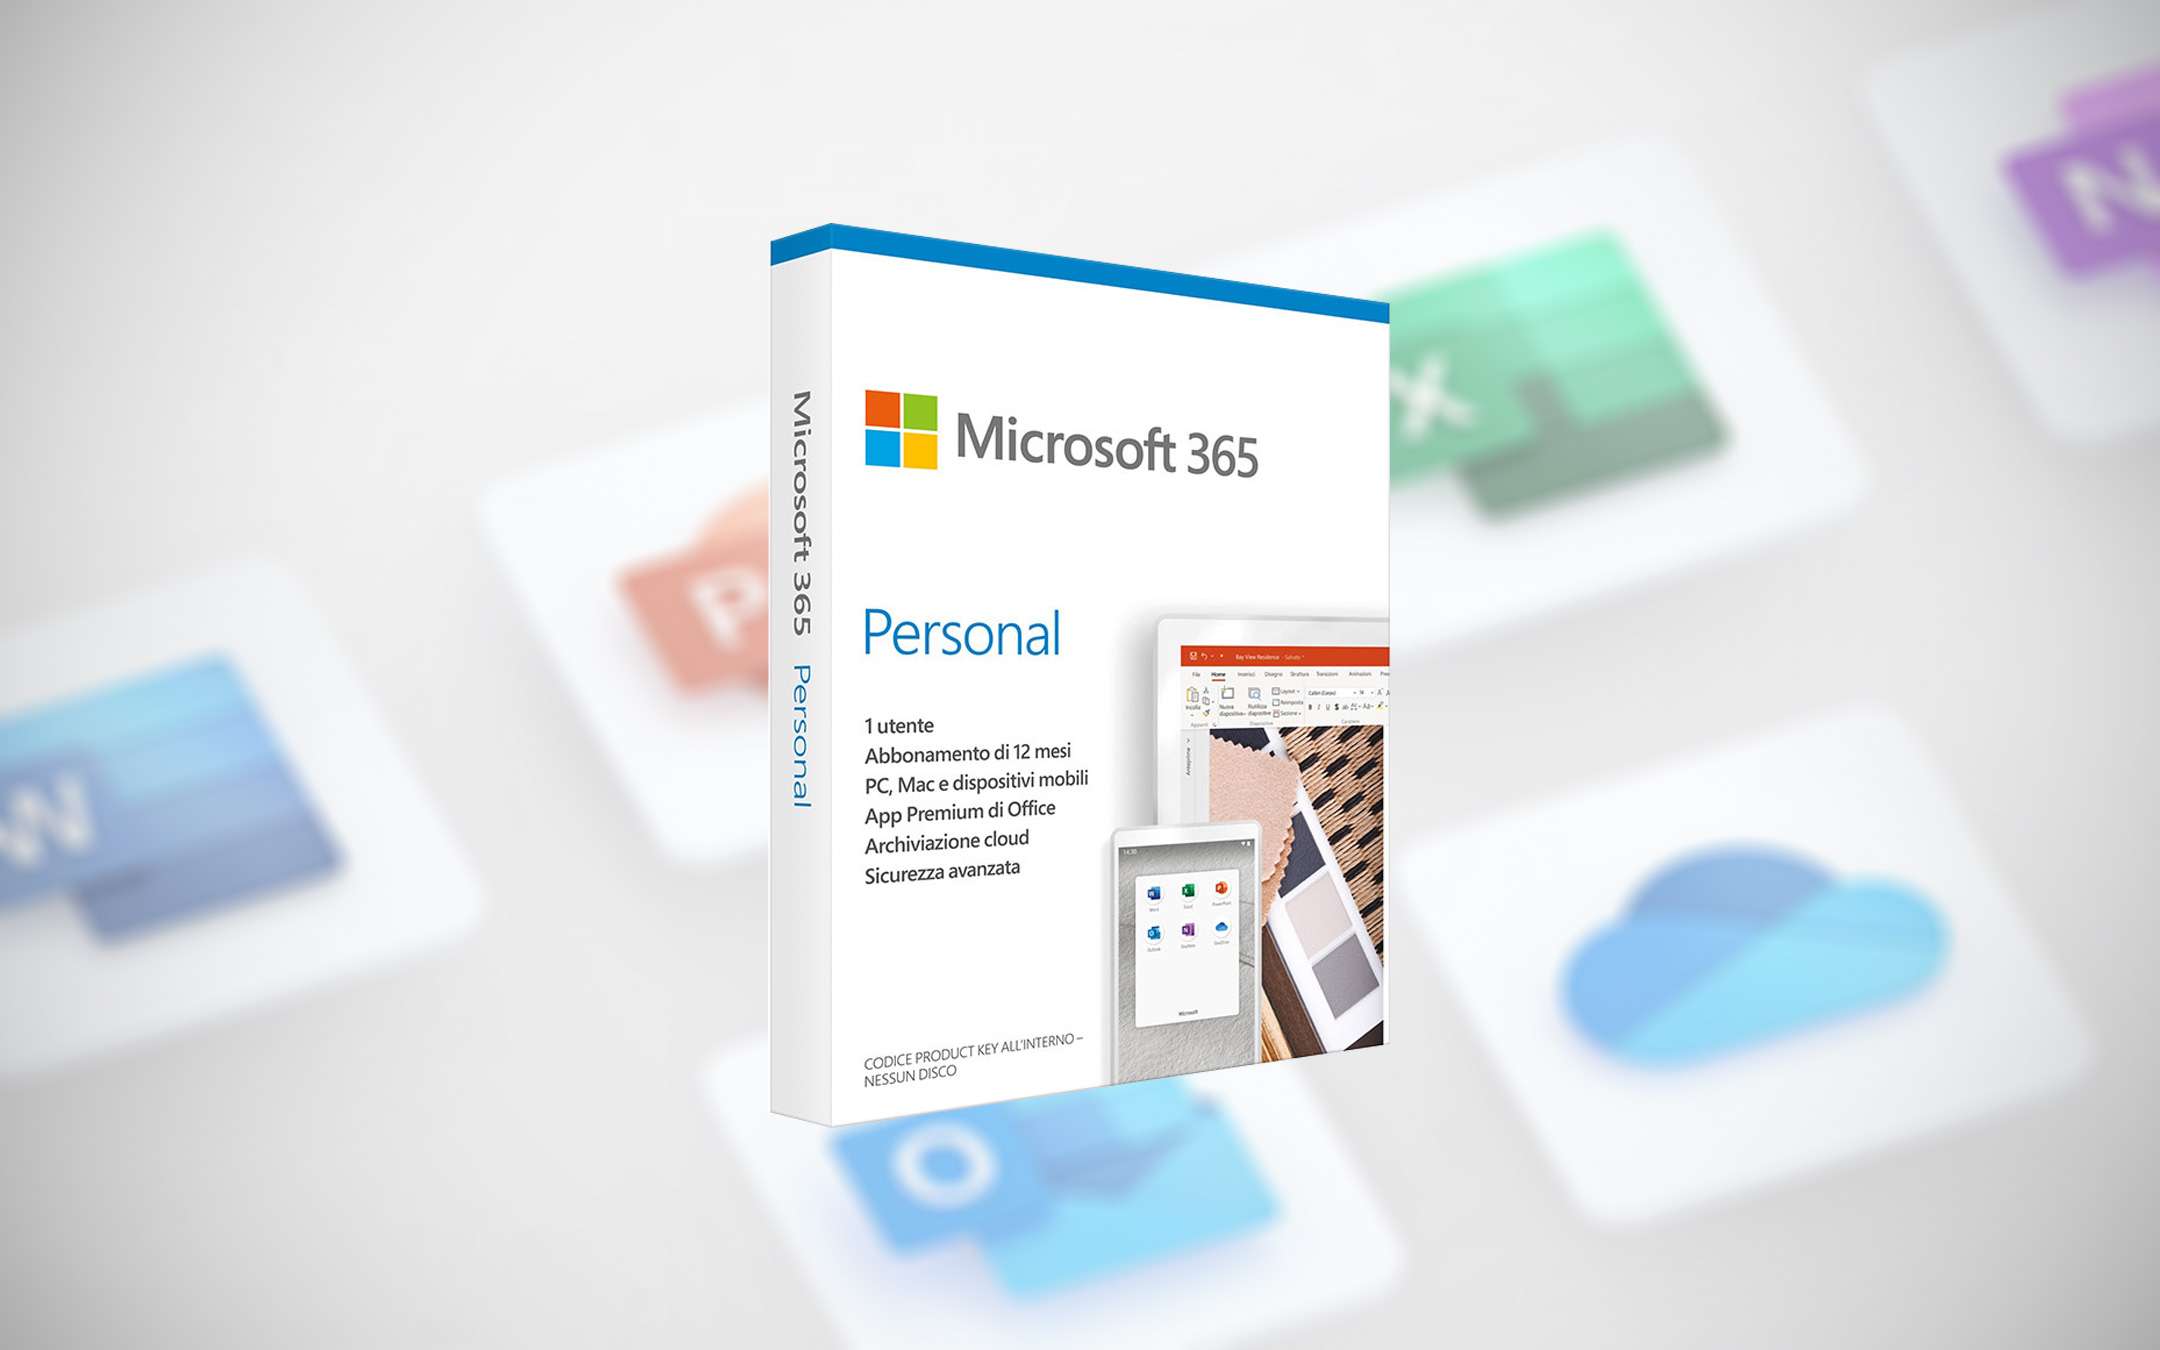 Microsoft 365 Personal: one year for only 49.99 euros